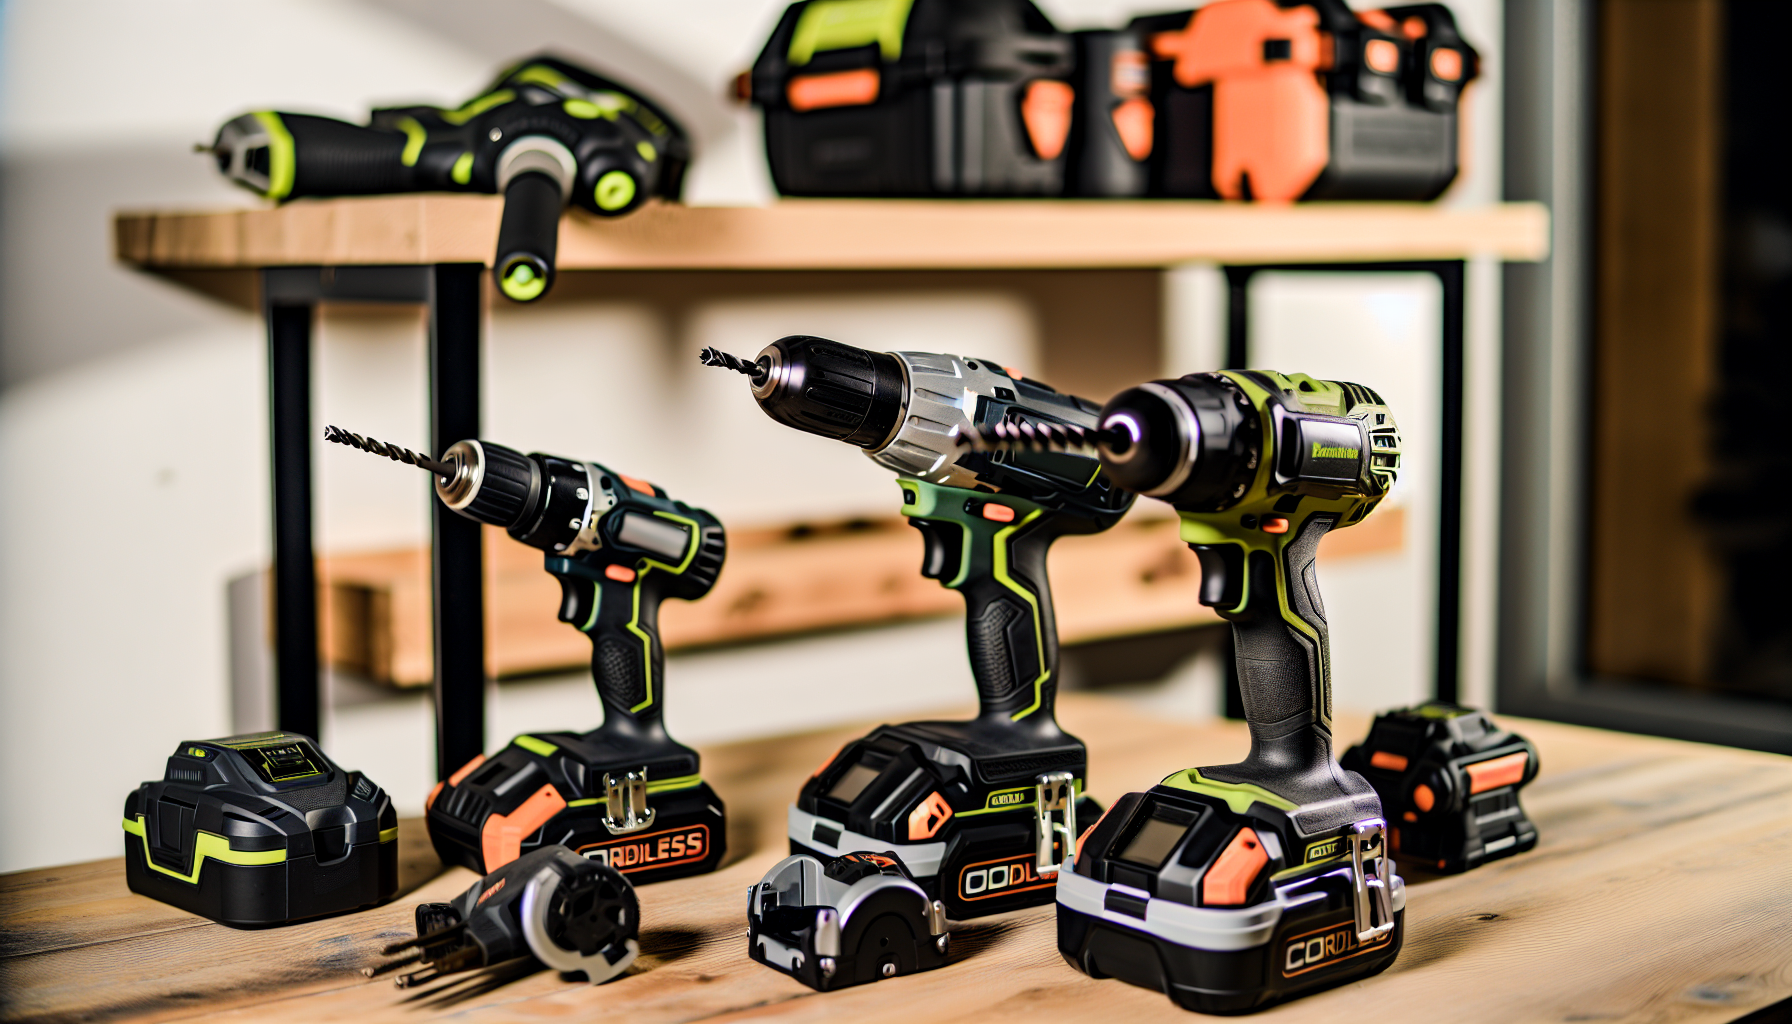 Cordless tools offering flexibility and convenience